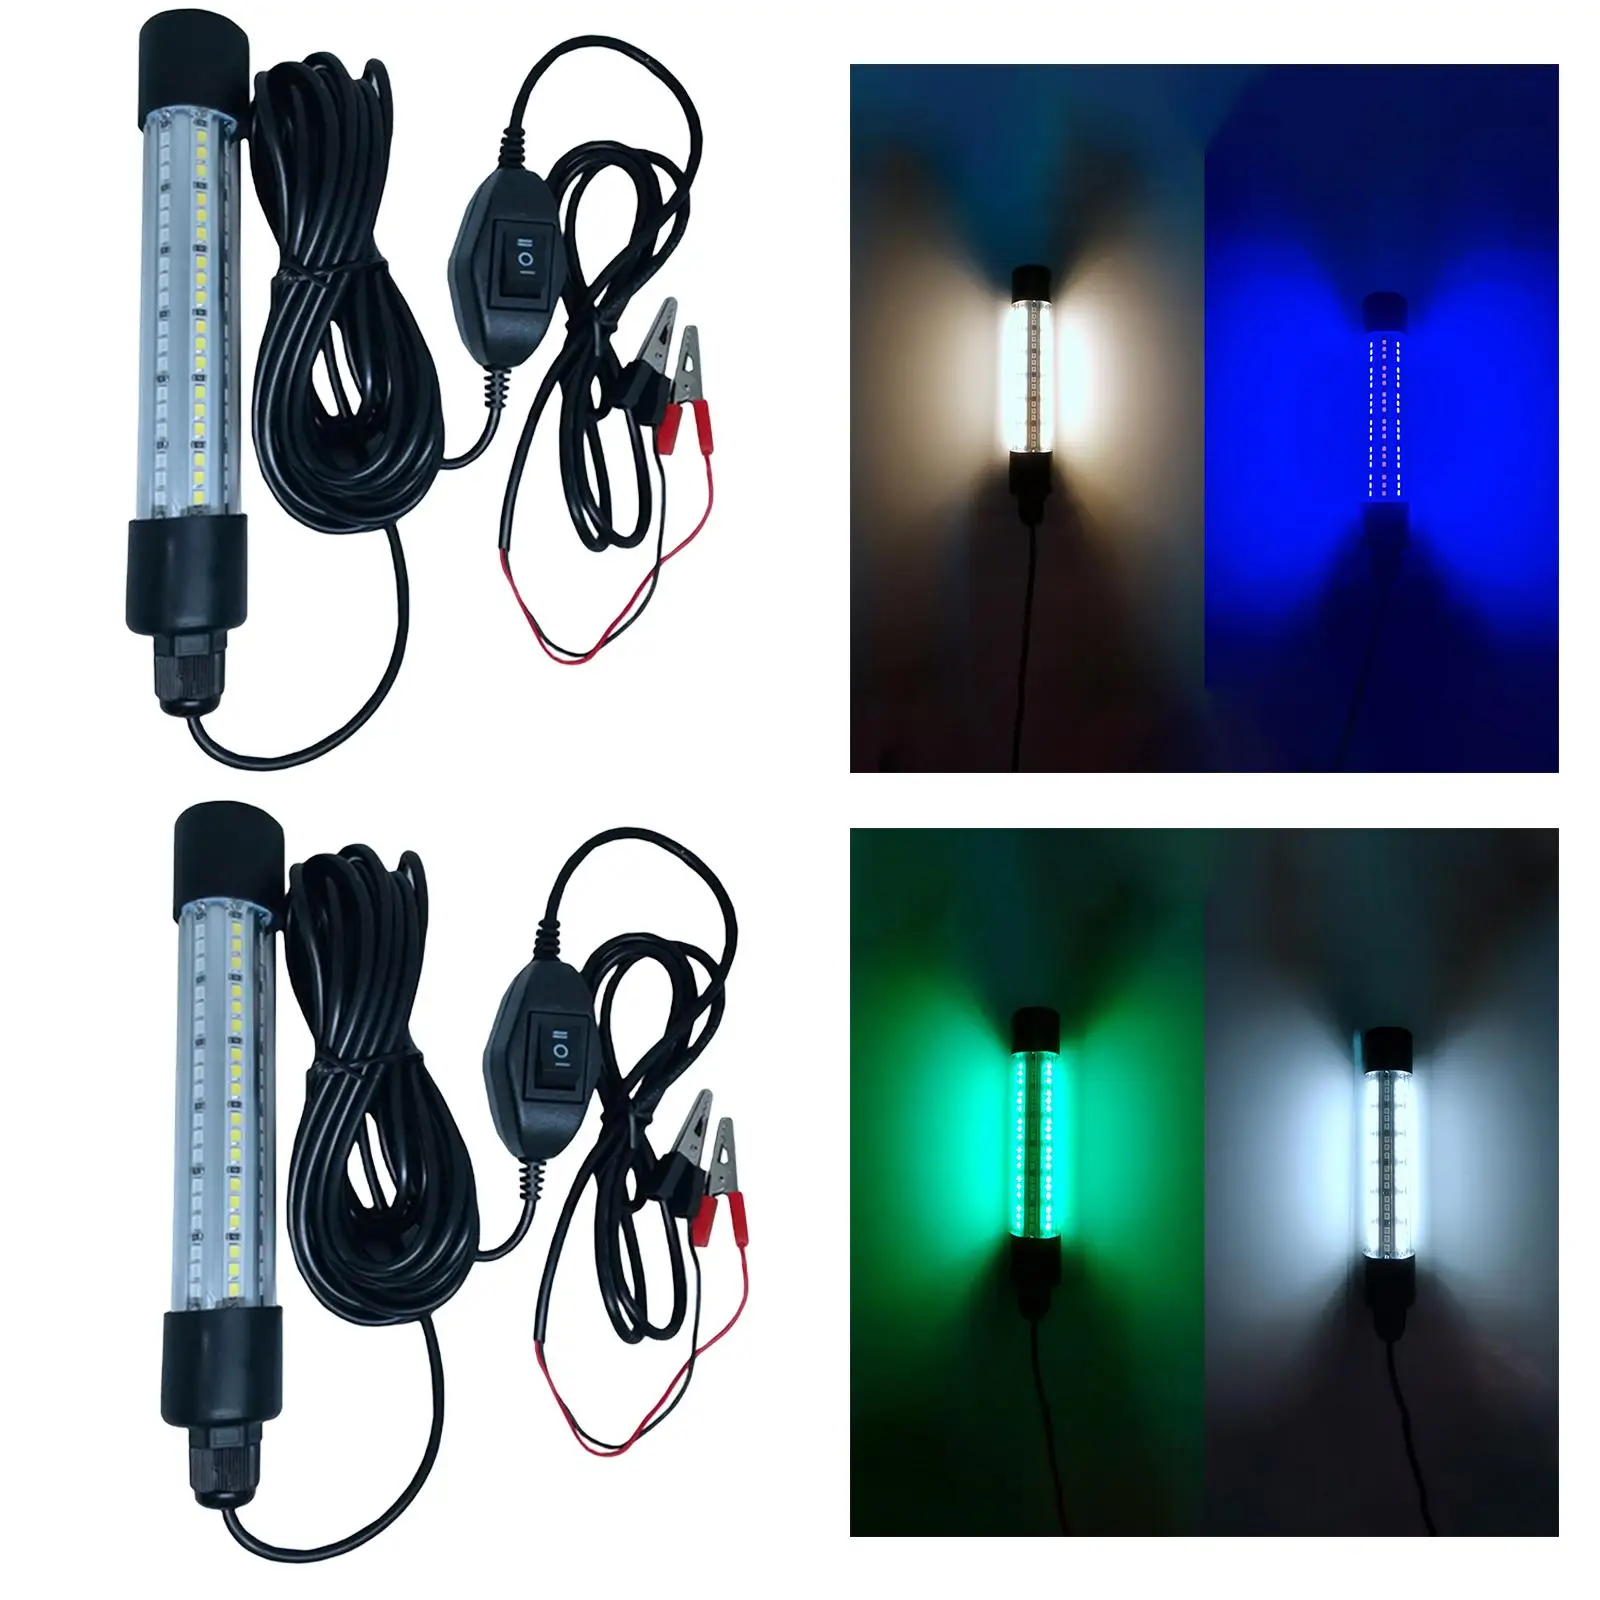 12V 100W LED Submersible Light Fish Fishing Finder Lamp Underwater Crappie Lure with 5M Cord Bait Fish for Boat Dock Saltwater